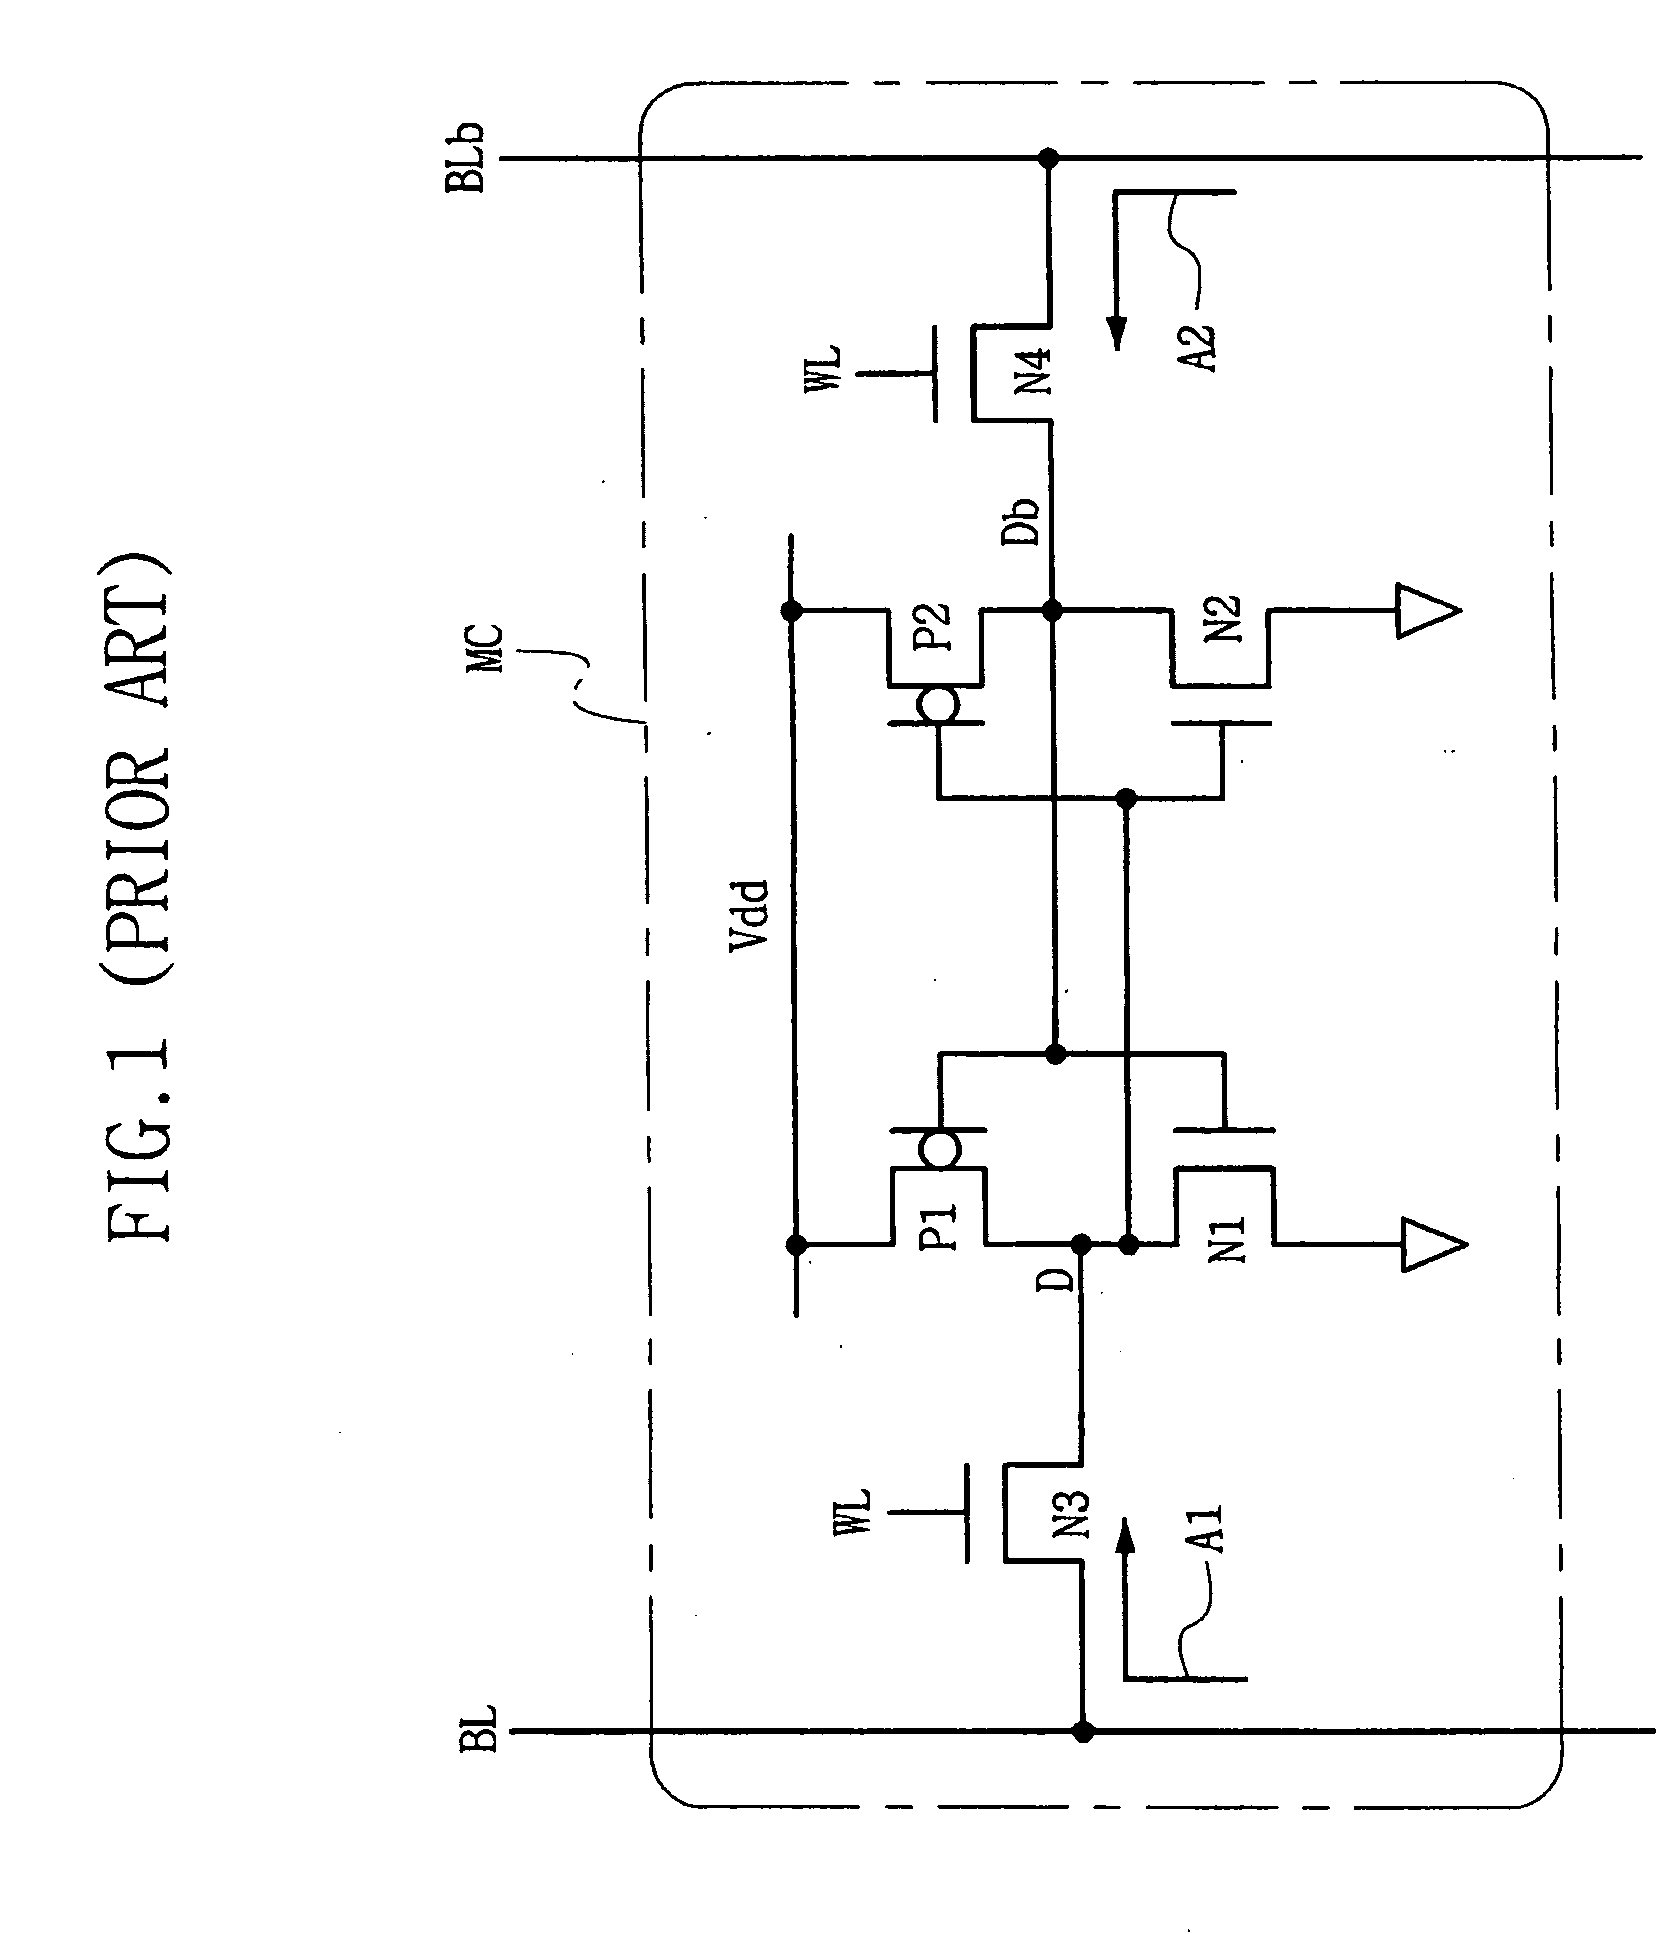 Bit line voltage supply circuit in semiconductor memory device and voltage supplying method therefor